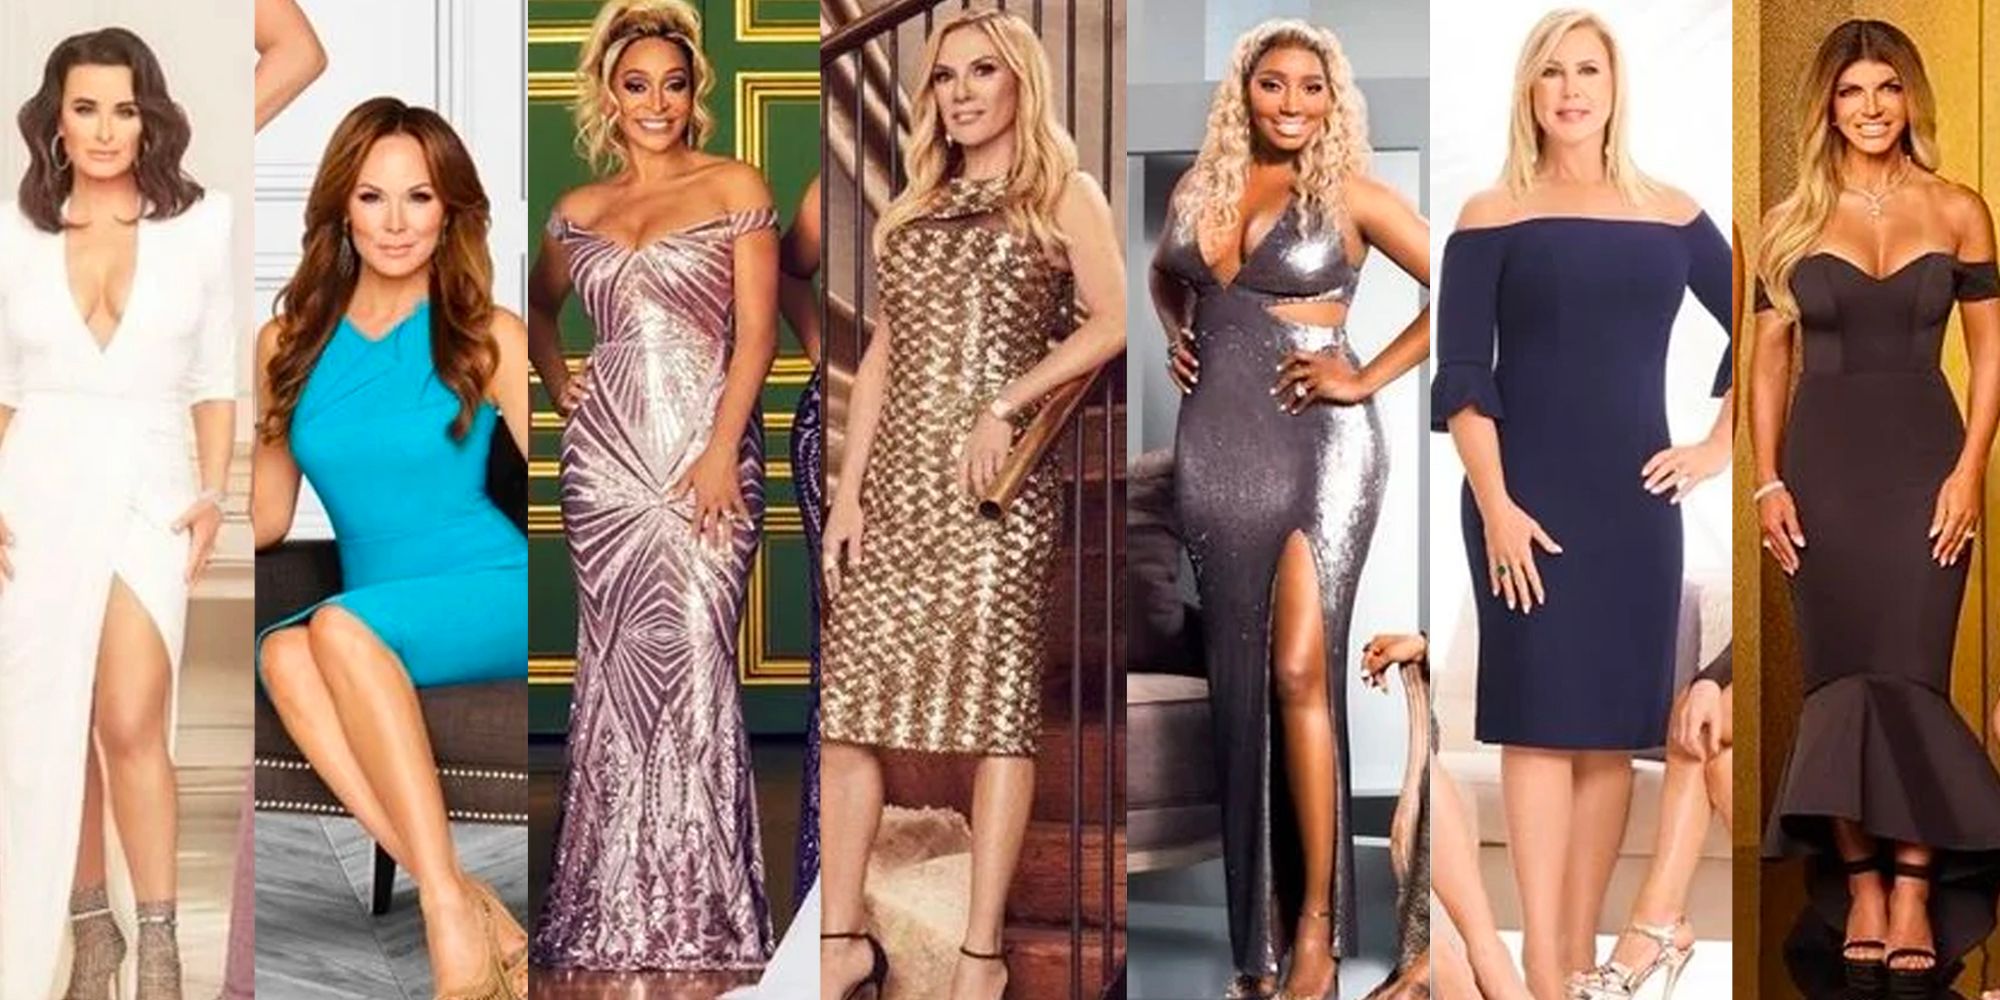 Every American Real Housewives Franchise, Ranked